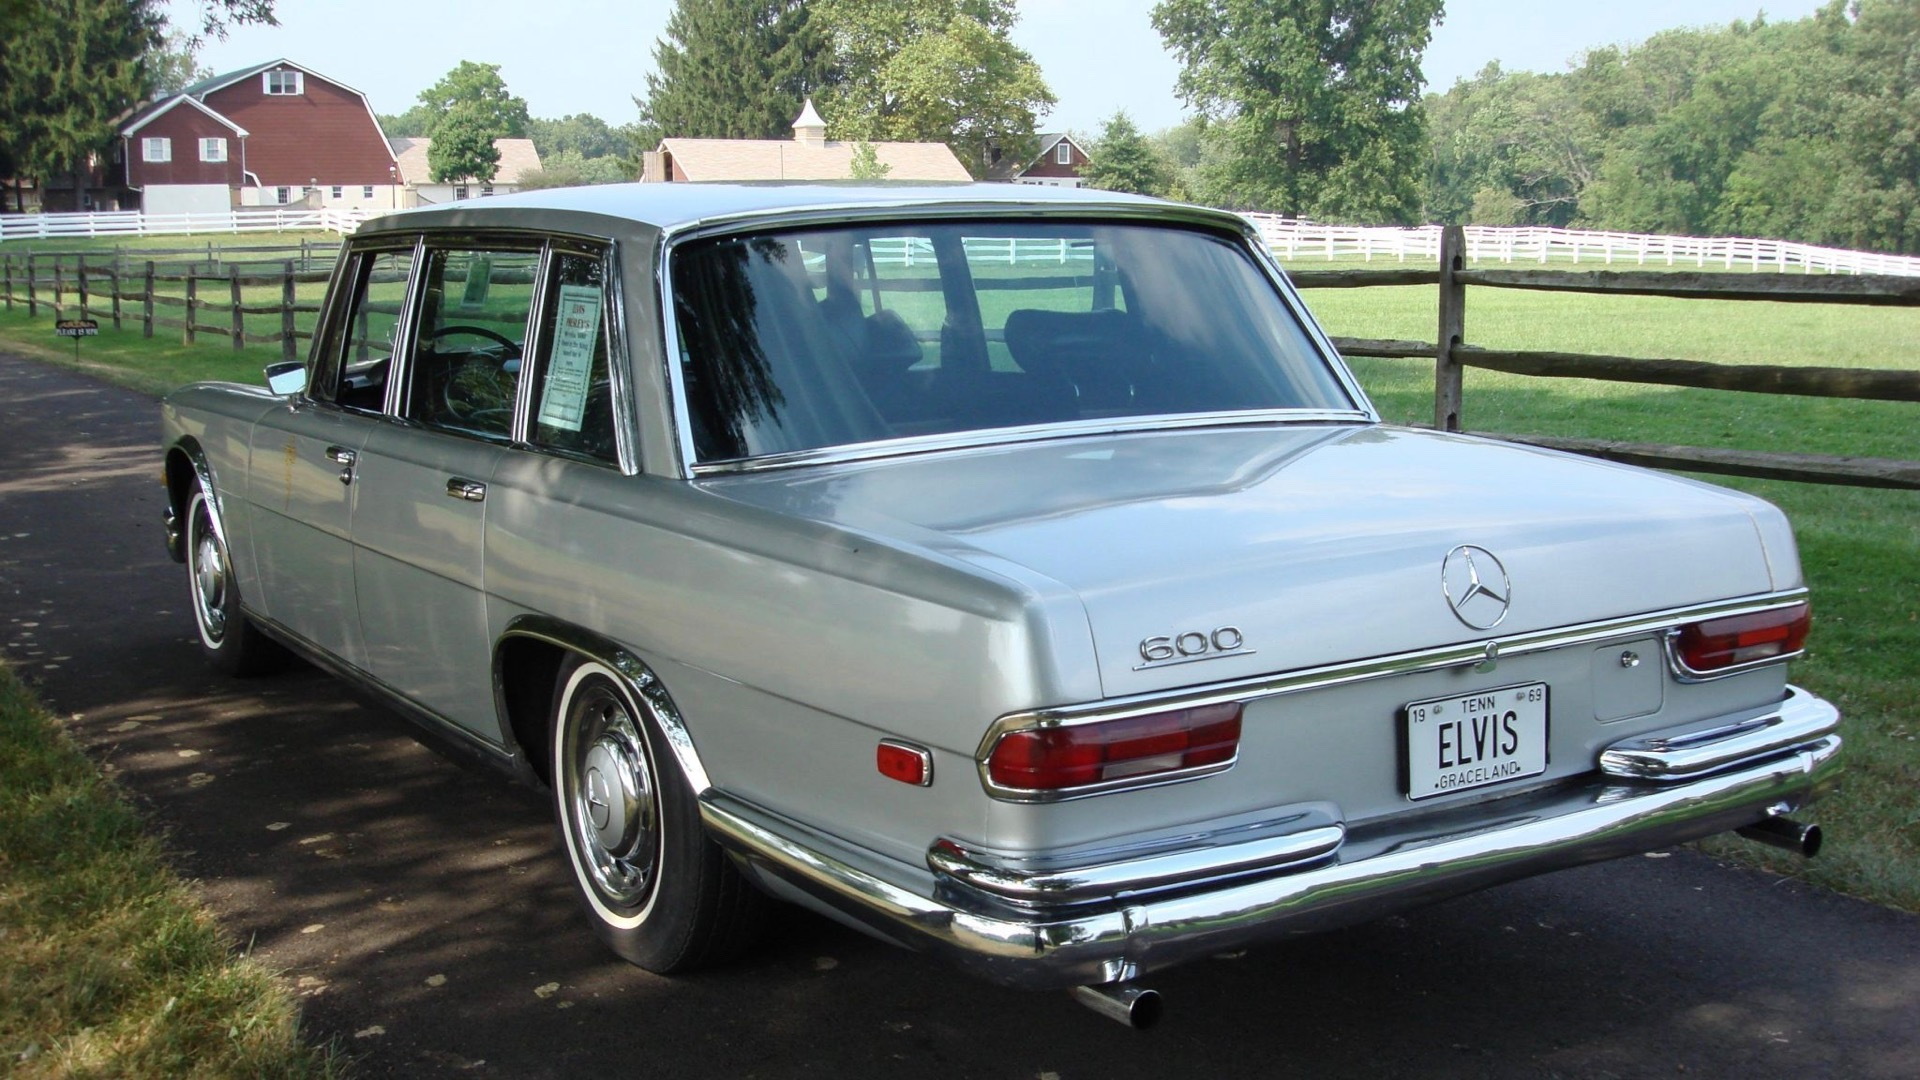 1969 Mercedes-Benz 600 owned by Elvis Presley (Photo by Bring a Trailer)